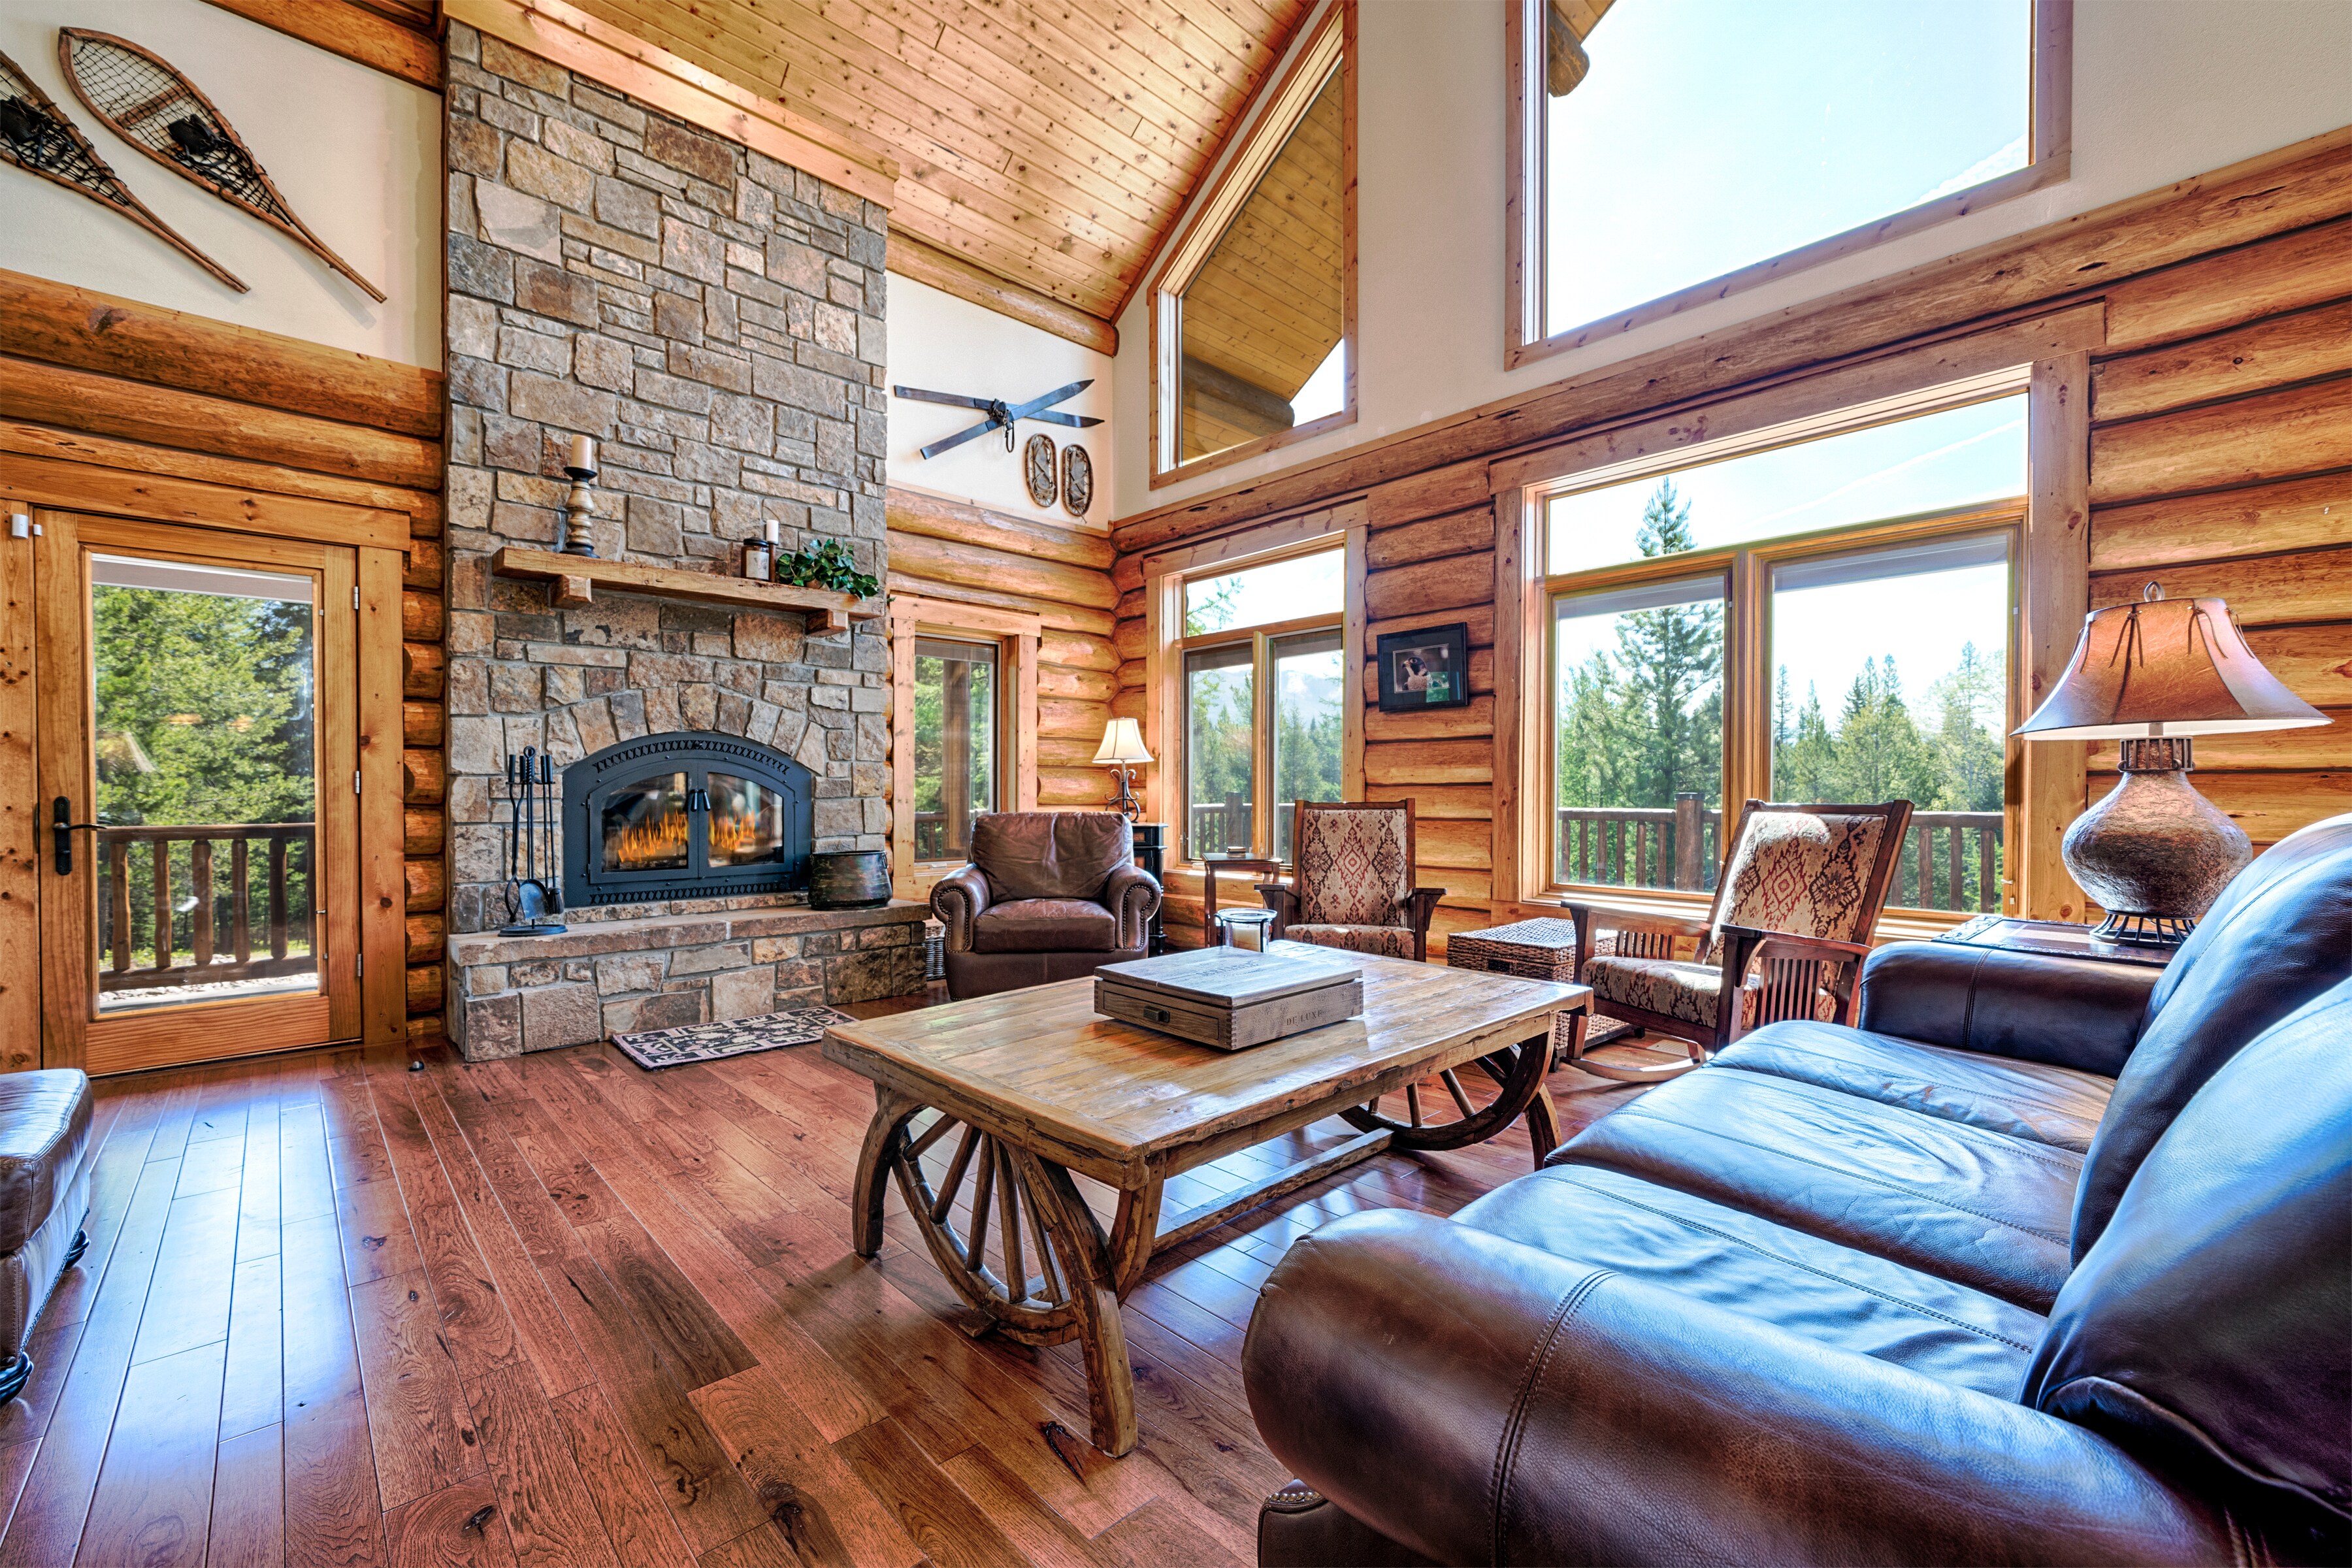 Vaulted ceilings, stone fireplace, what more can one desire!